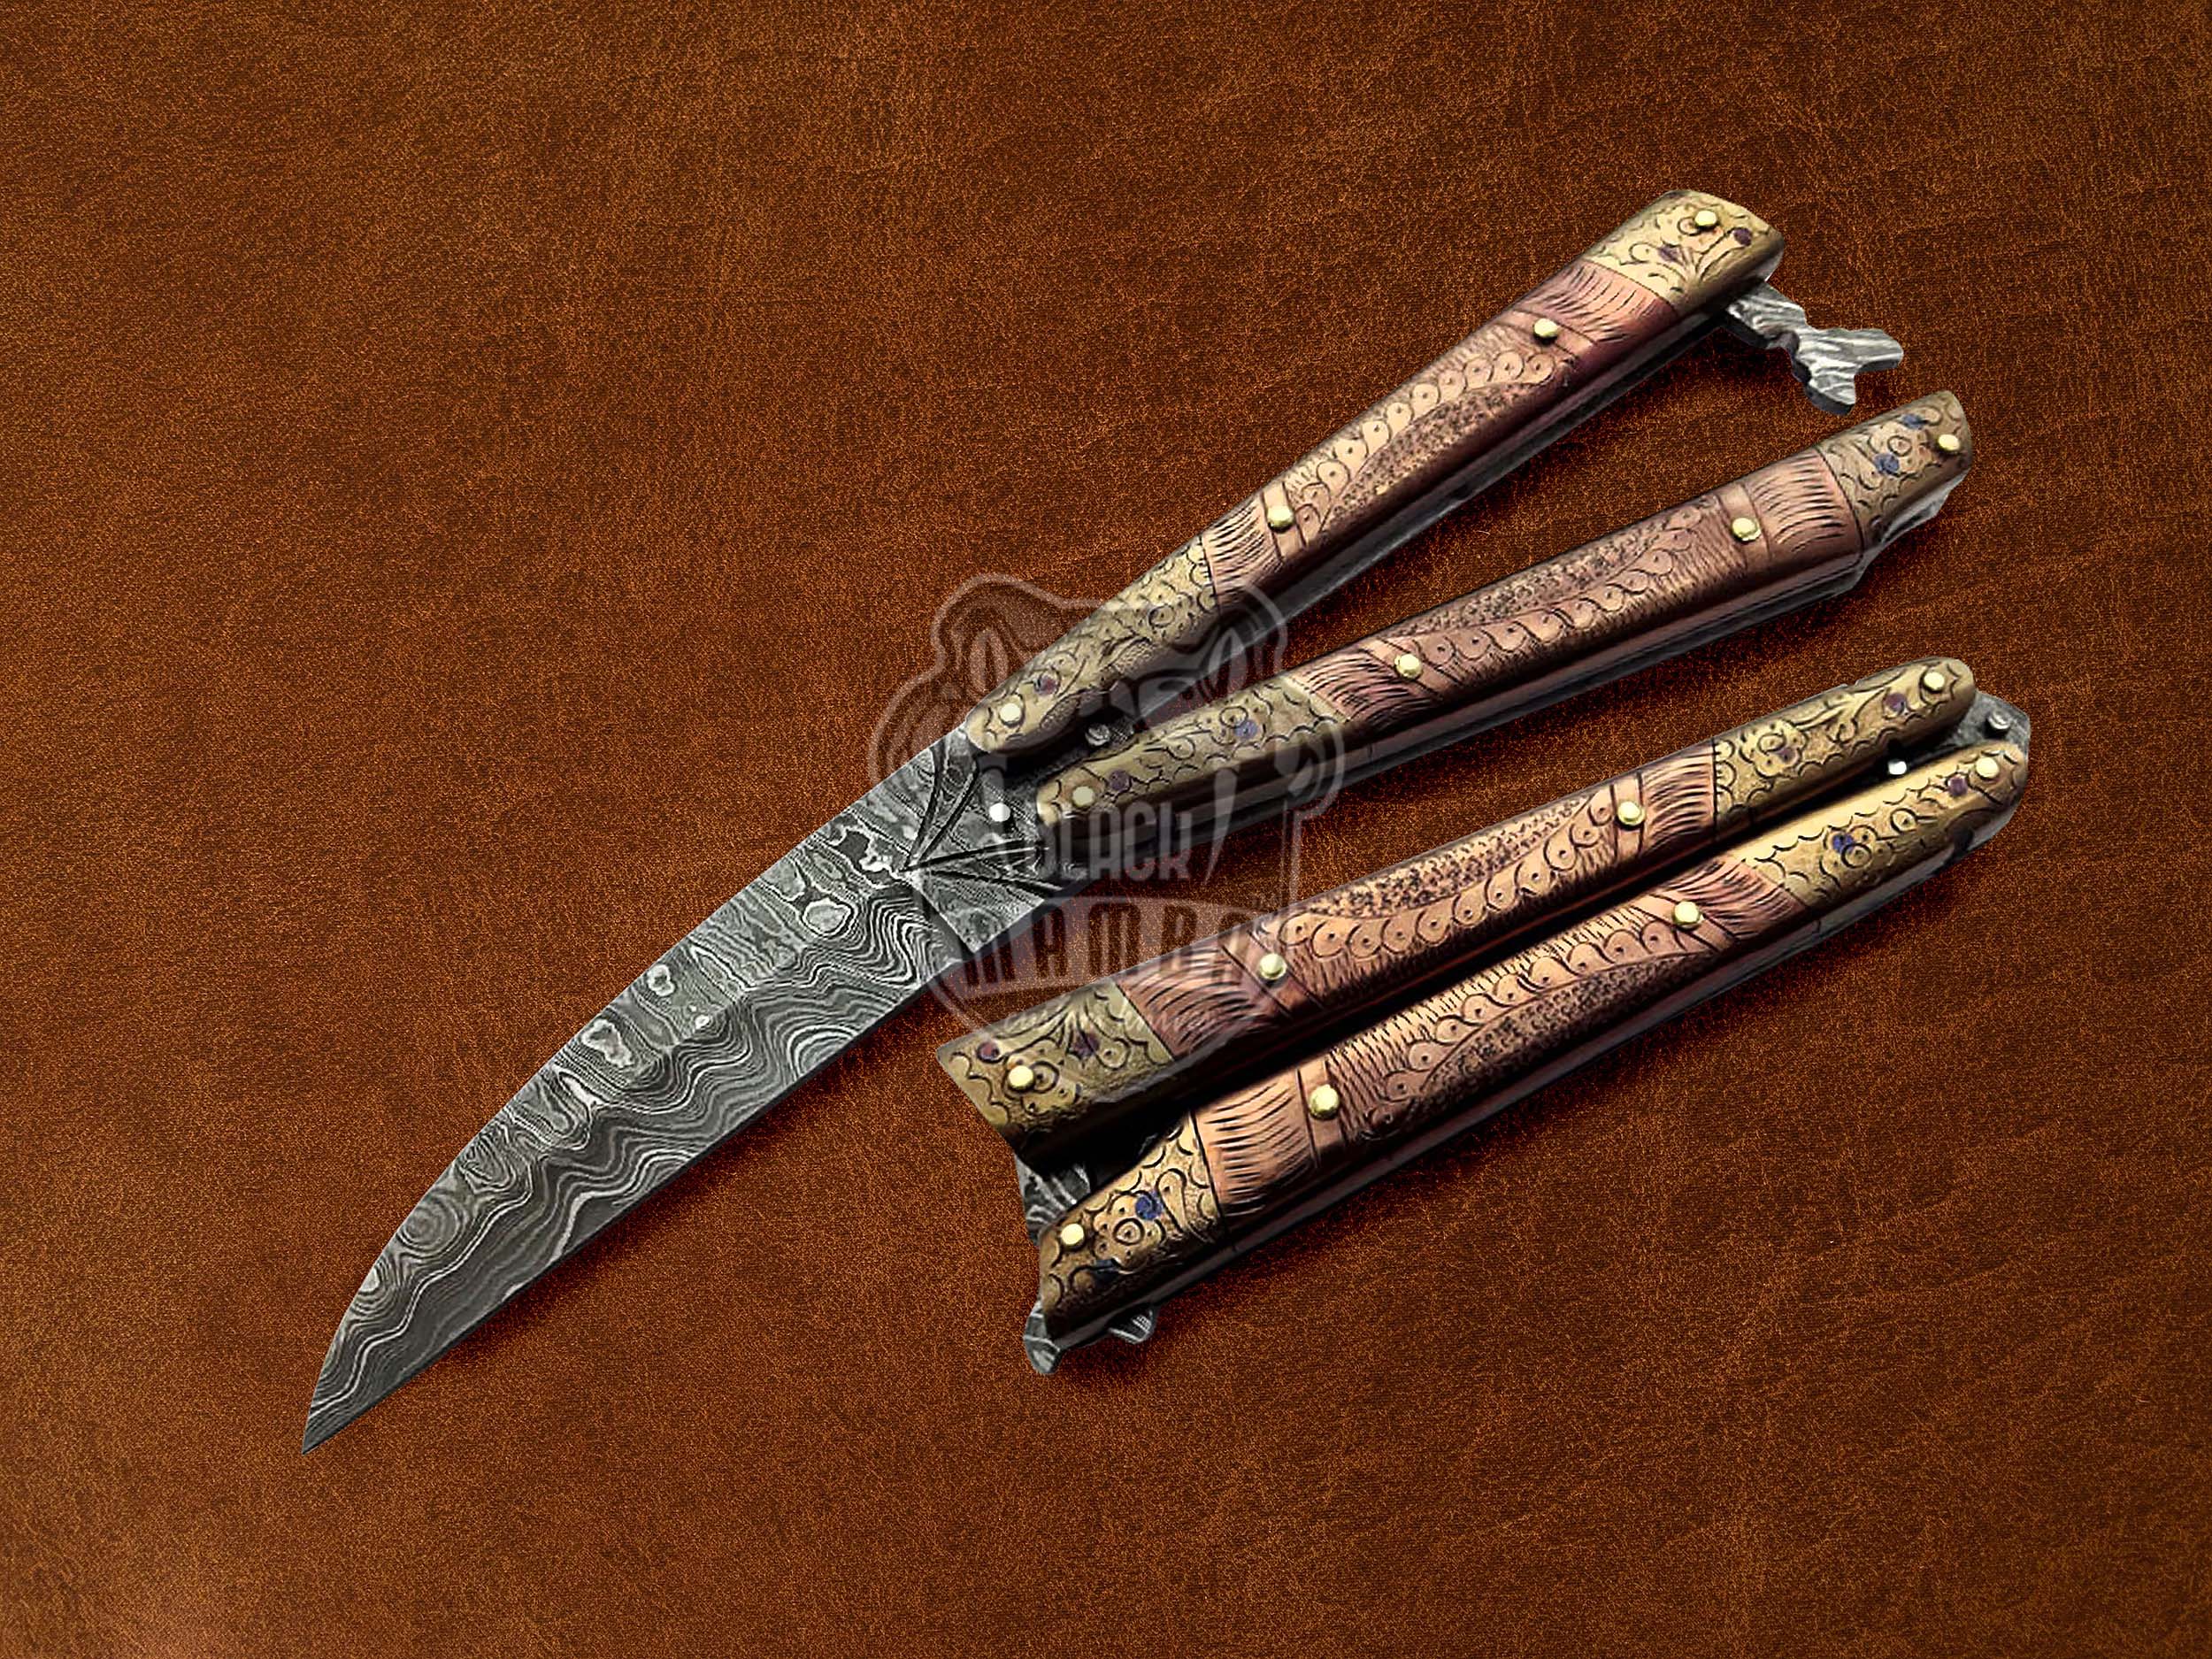 BMK-530 Damascus Balisong Butterfly Knife Engraved Handle